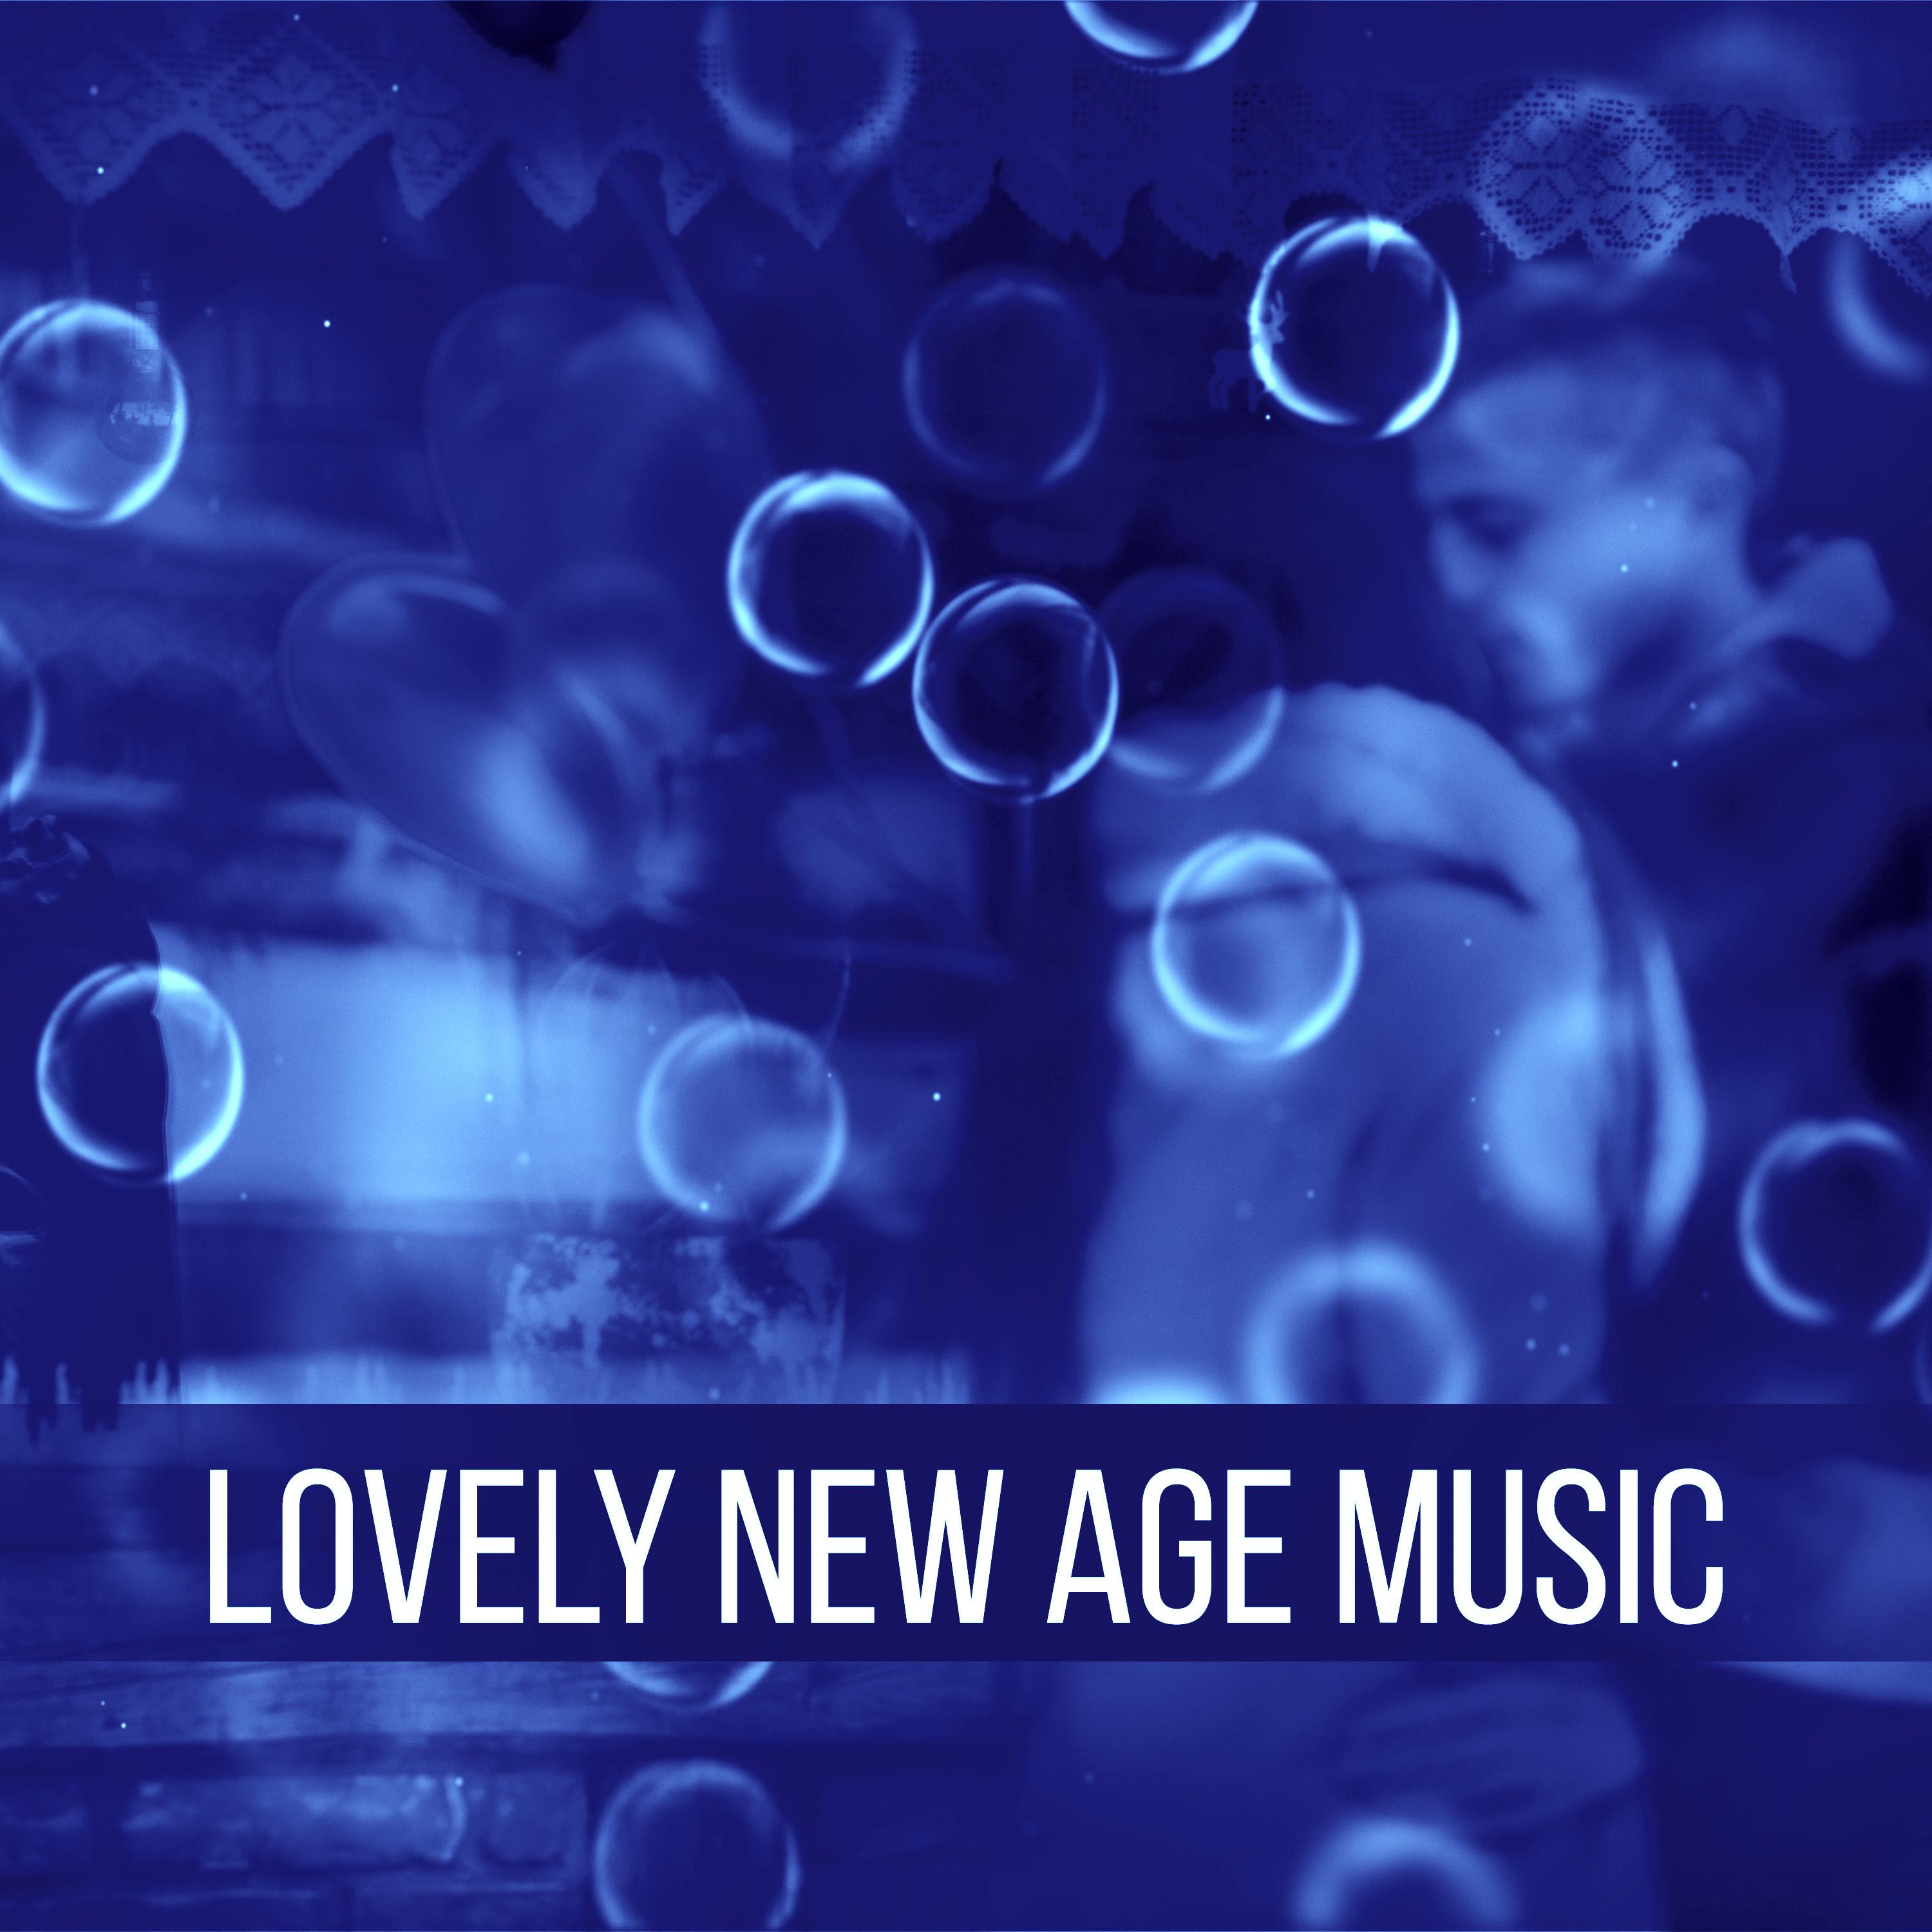 Lovely New Age Music  Hot  Romantic Evening, Calm Down, Late Date, Night Music